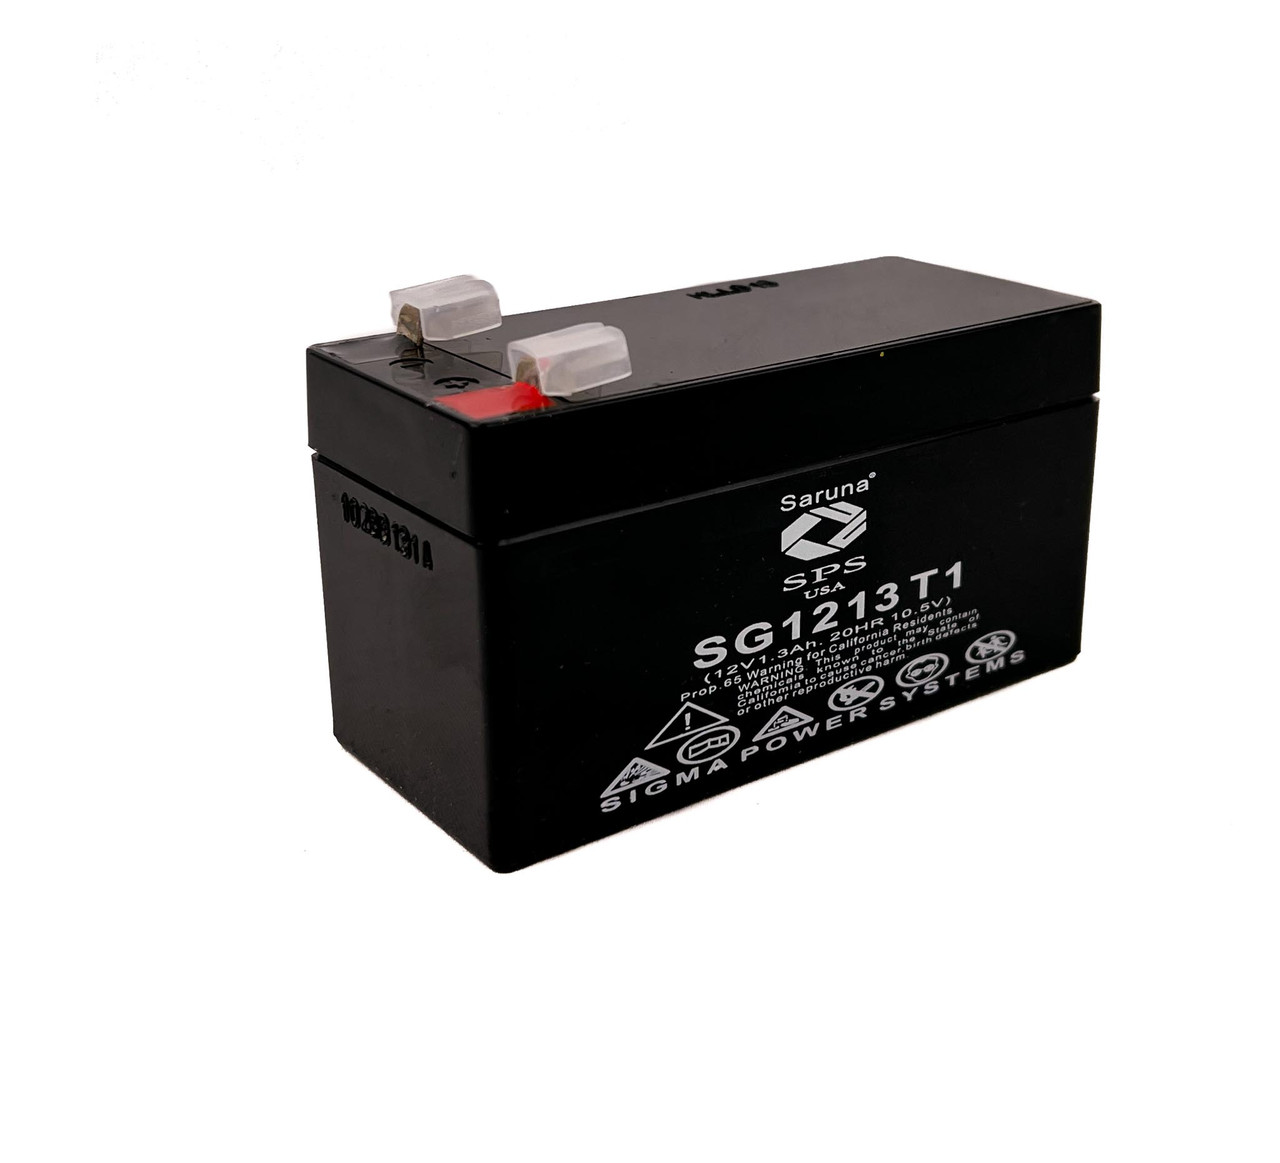 Raion Power 12V 1.3Ah Non-Spillable Replacement Rechargebale Battery for Park Medical Electronics Lab 811B Doppler